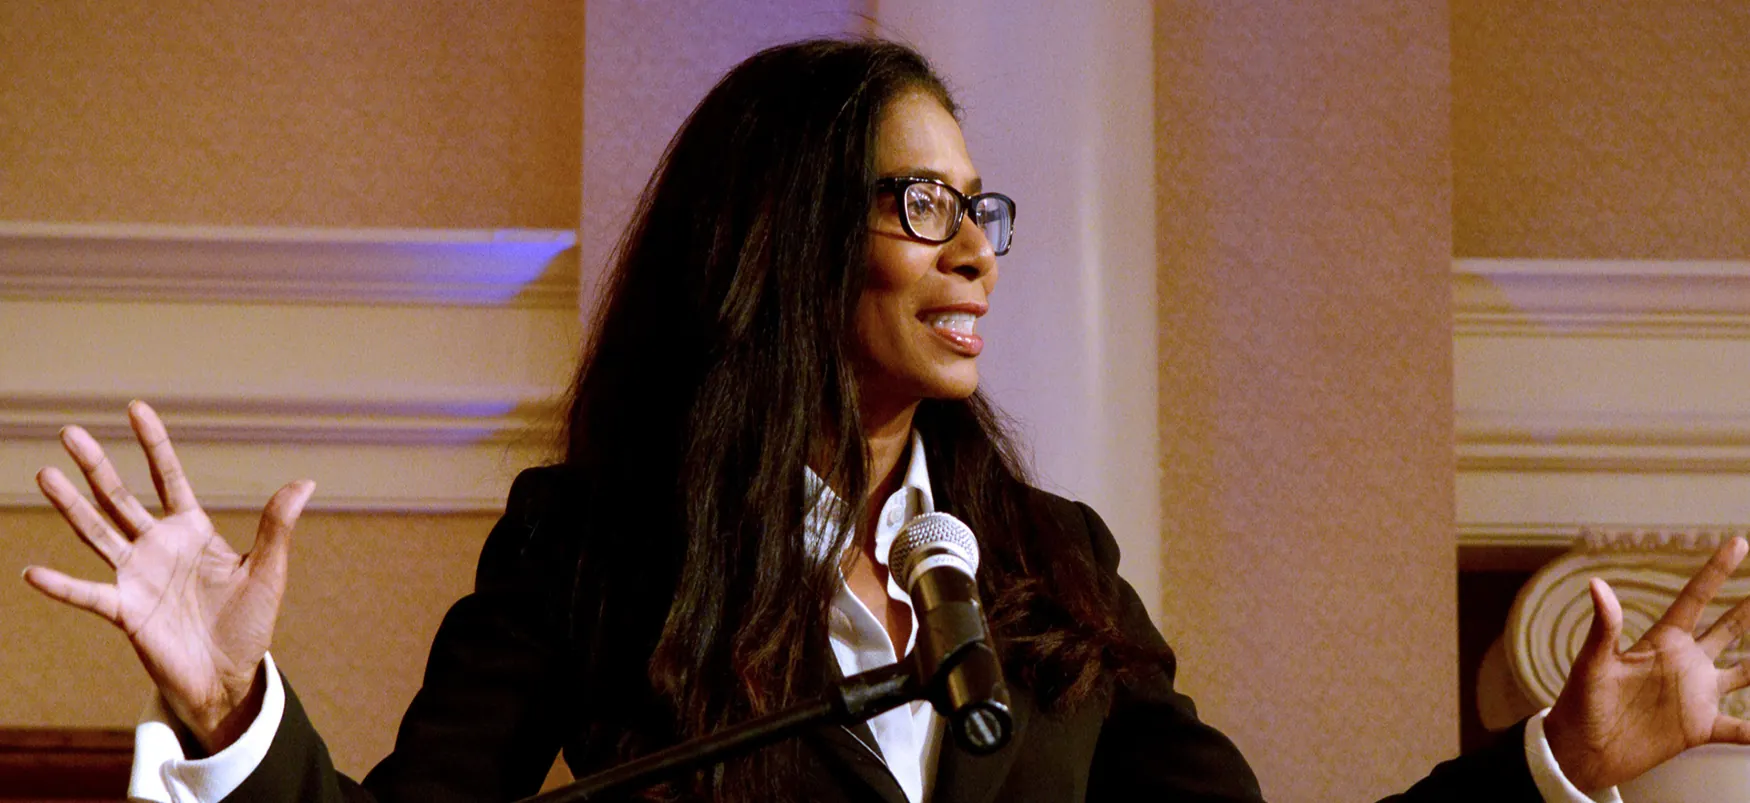 Judy Smith, an American crisis manager, lawyer, author, and television producer, speaks at the Roanoke College Regional Forum.